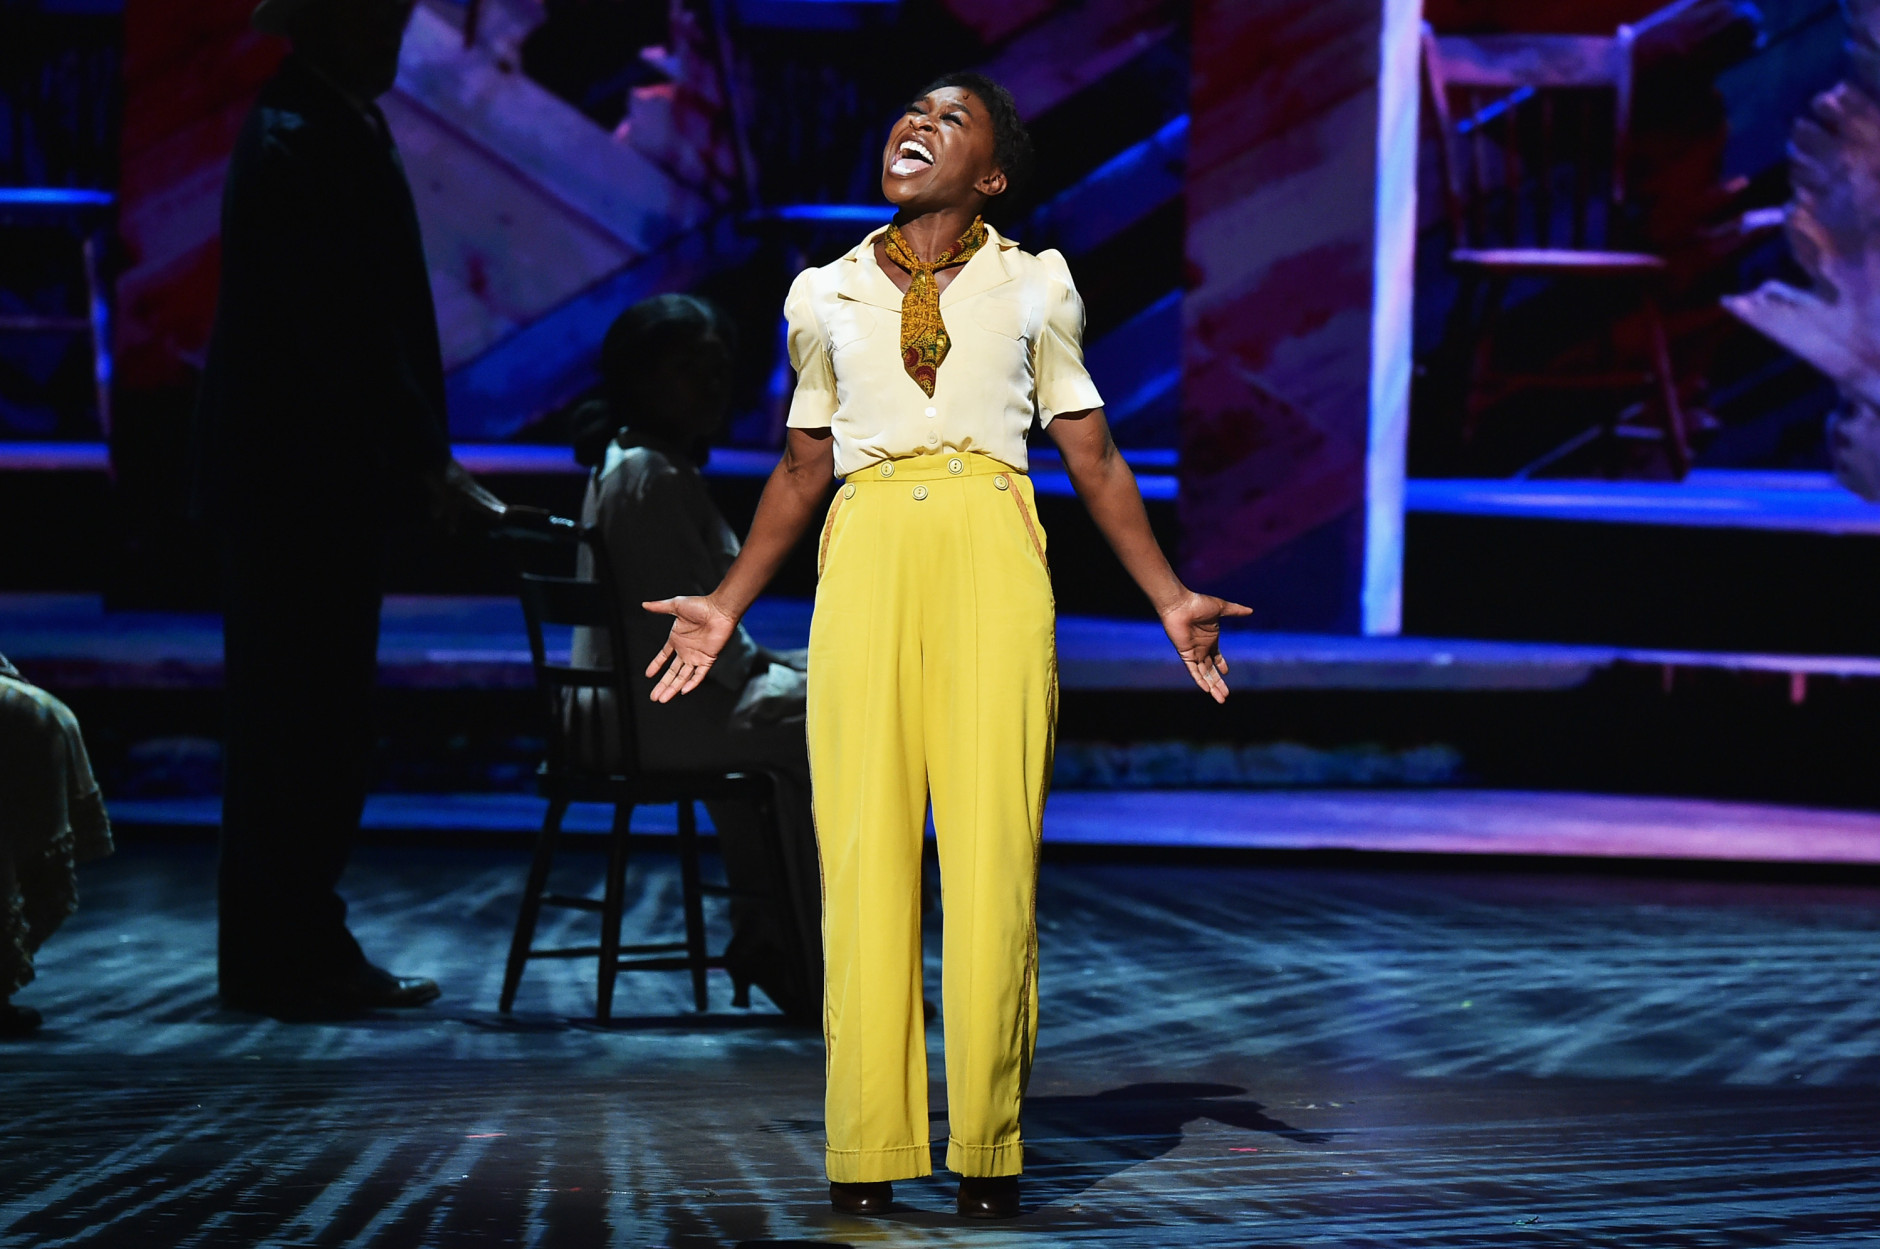 NEW YORK, NY - JUNE 12:  Cynthia Erivo of "The Color Purple" performs onstage during the 70th Annual Tony Awards at The Beacon Theatre on June 12, 2016 in New York City.  (Photo by Theo Wargo/Getty Images for Tony Awards Productions)